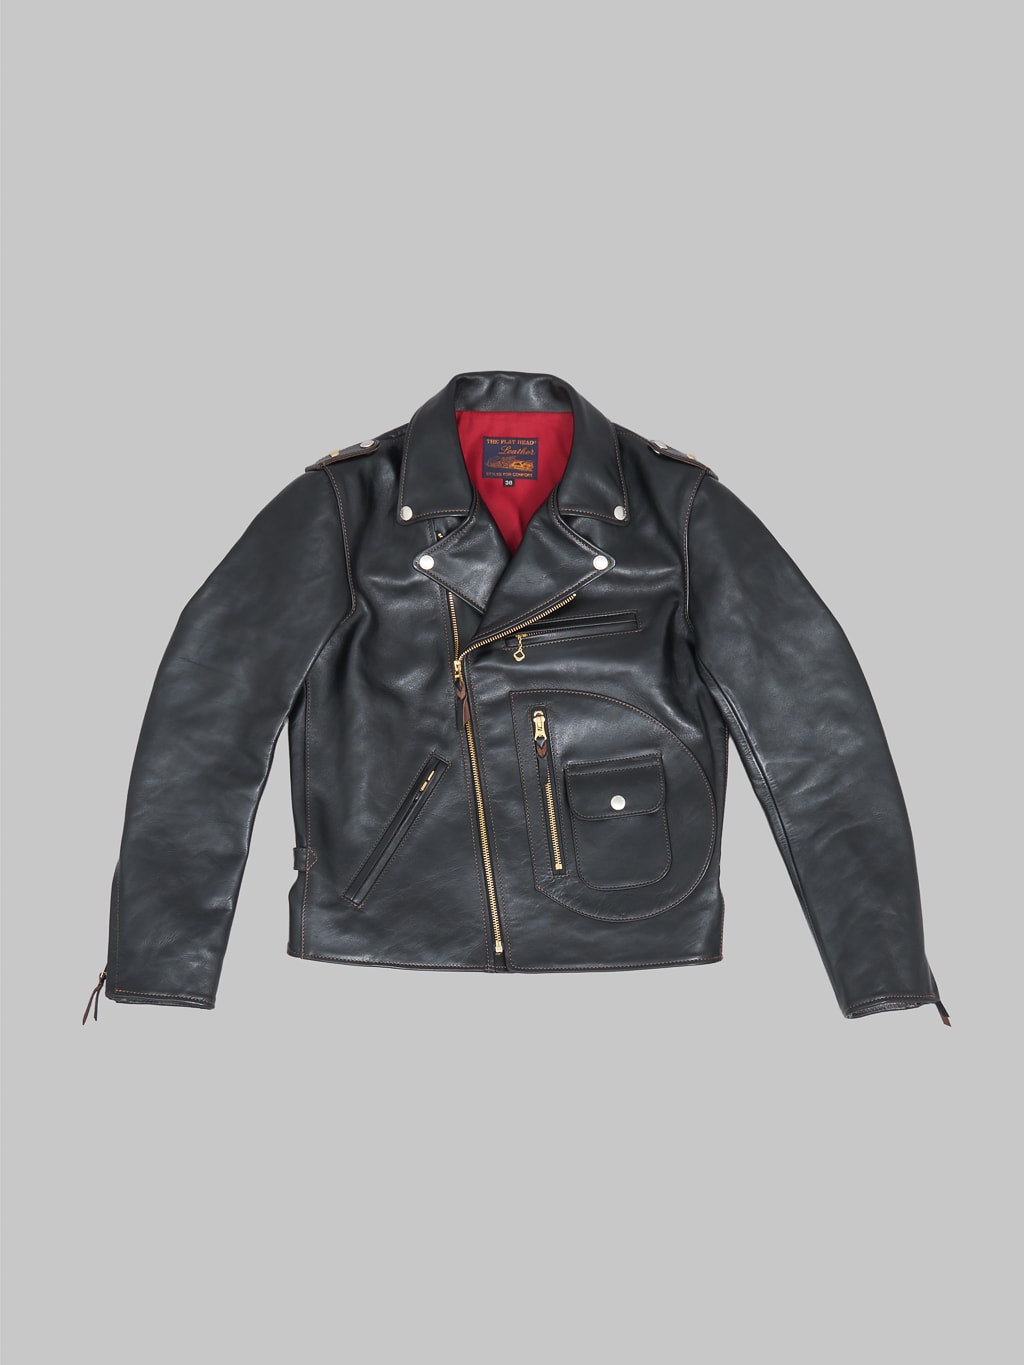 The Flat Head Horsehide leather double Riders Jacket Black Semi Aniline front